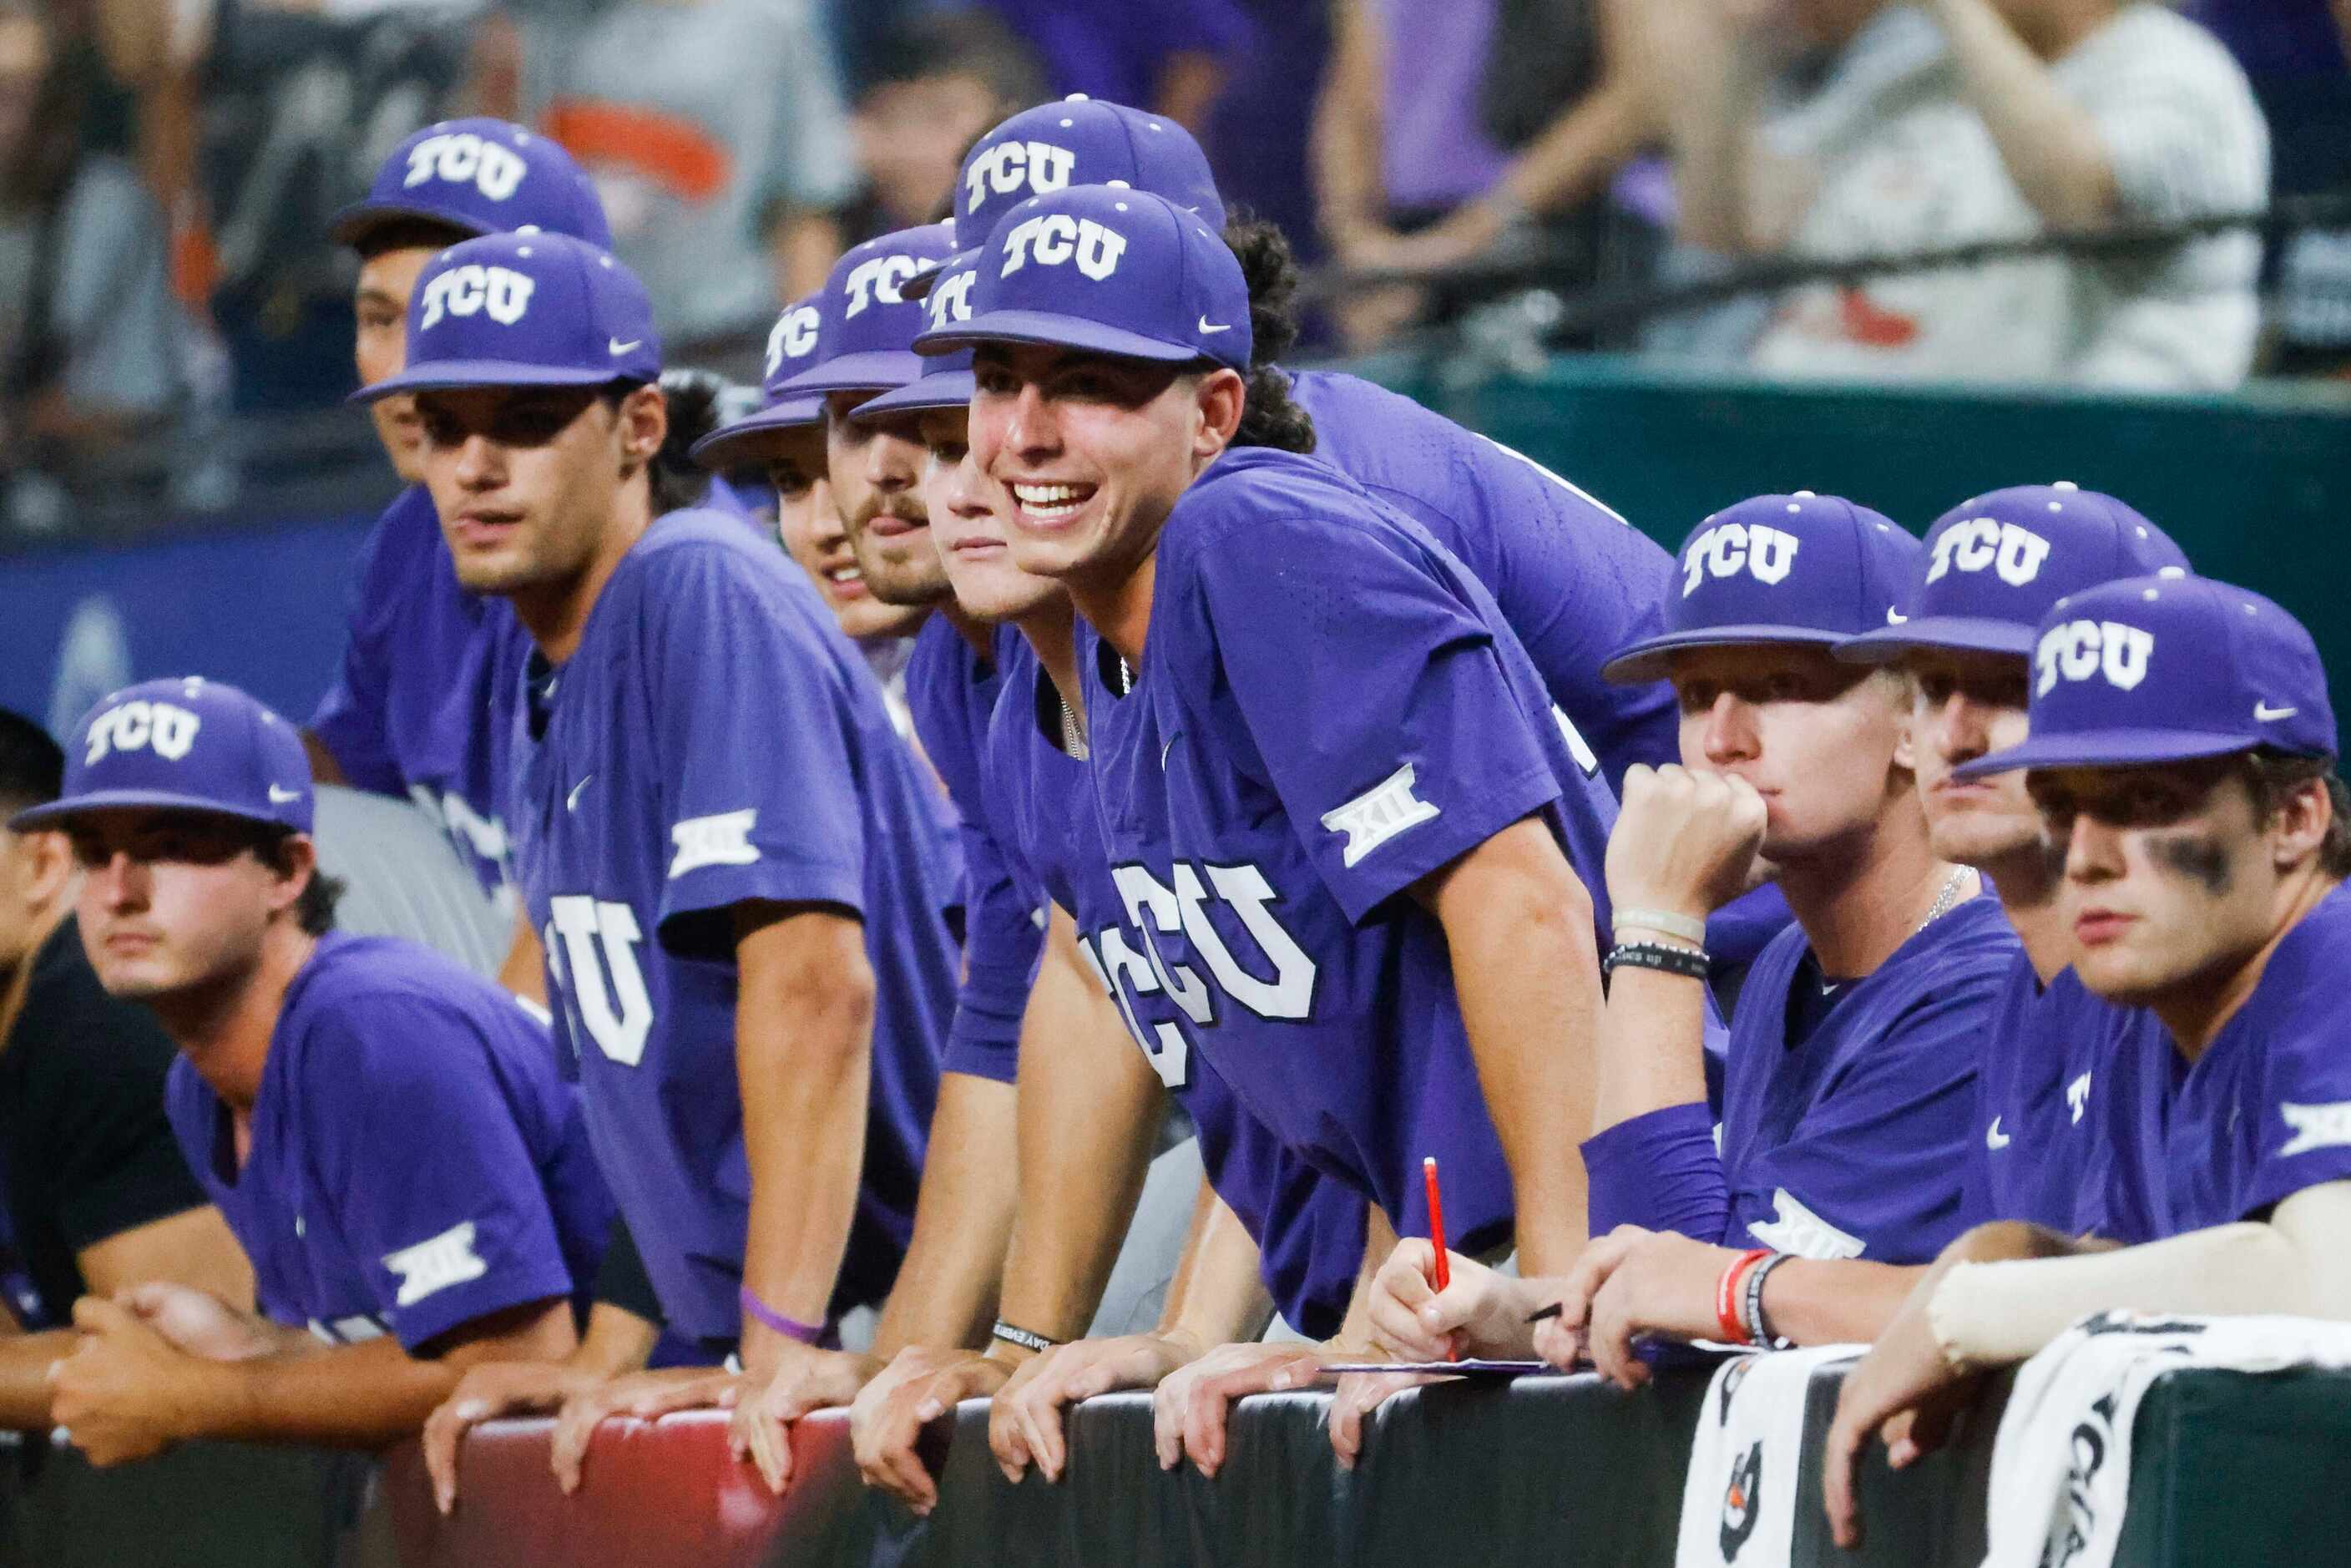 TCU players cheerfully wait in the dugout ahead of winning the Big 12 baseball championship...